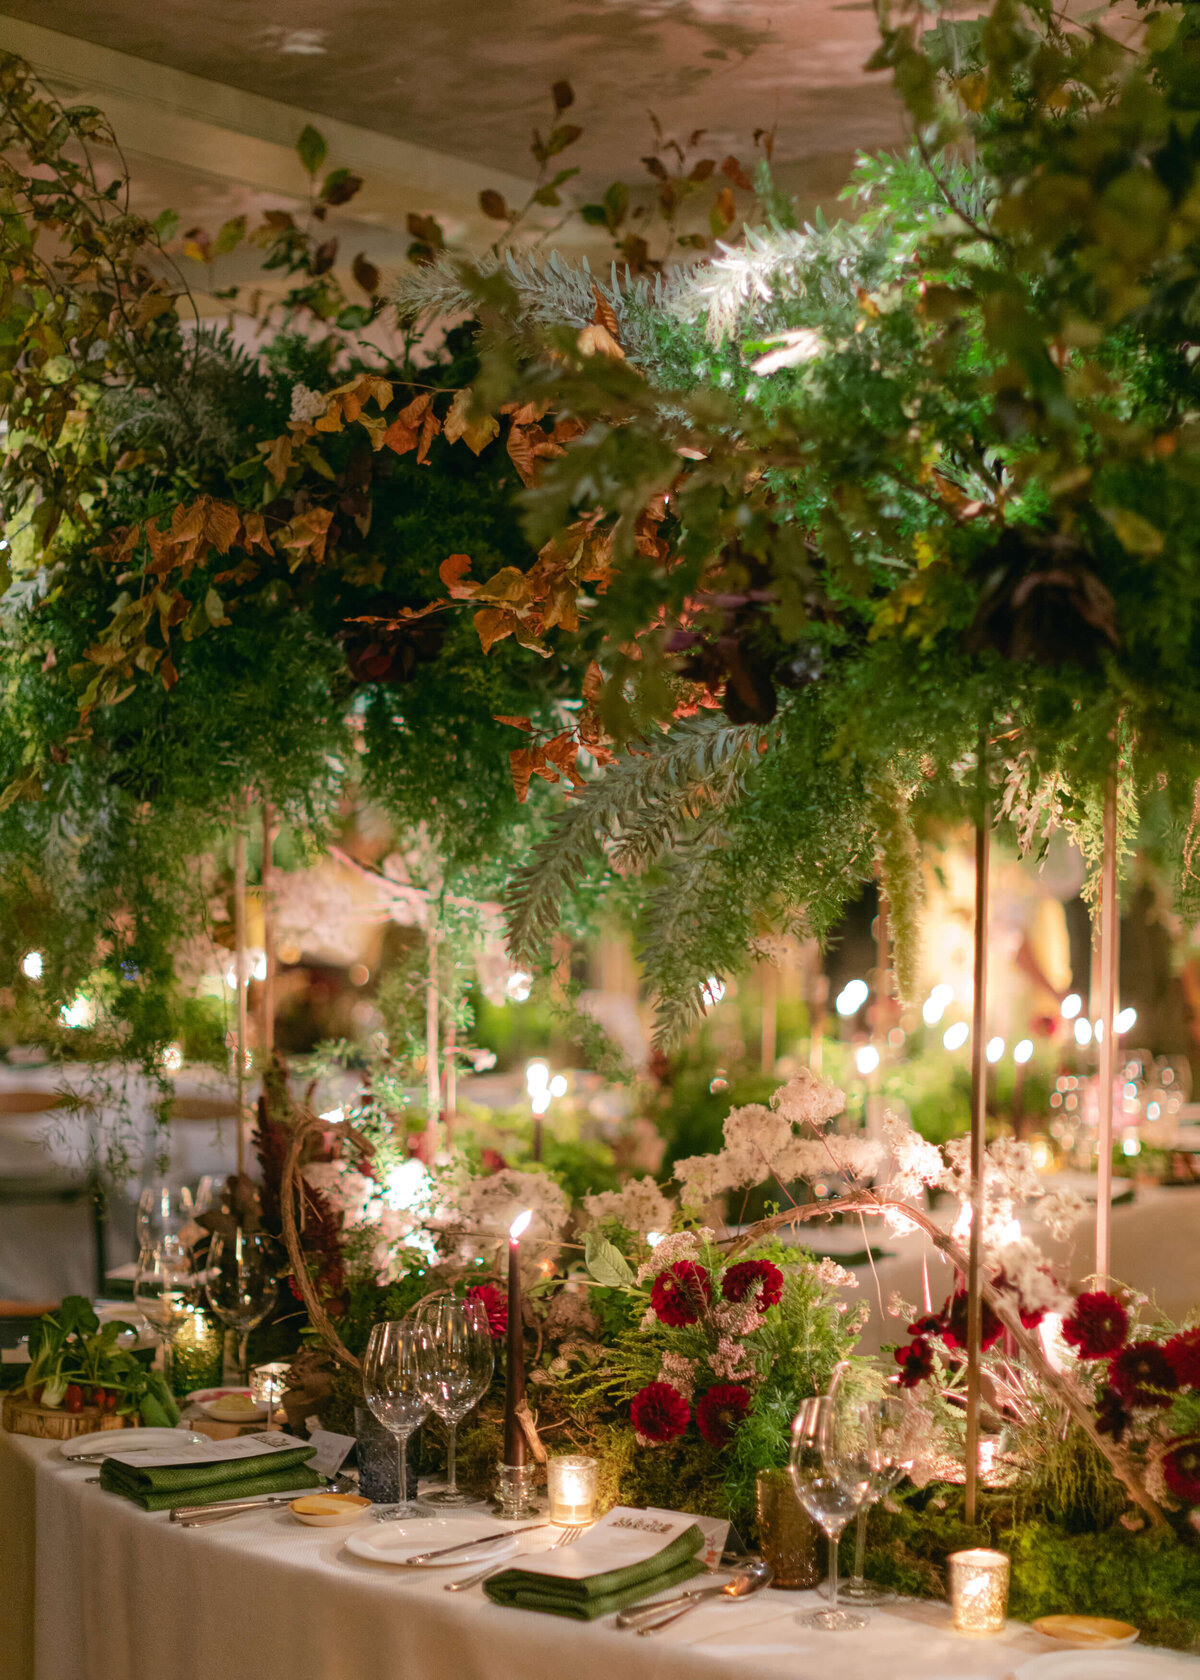 chloe-winstanley-events-heckfield-place-floral-installation-dinner-golborne-collection